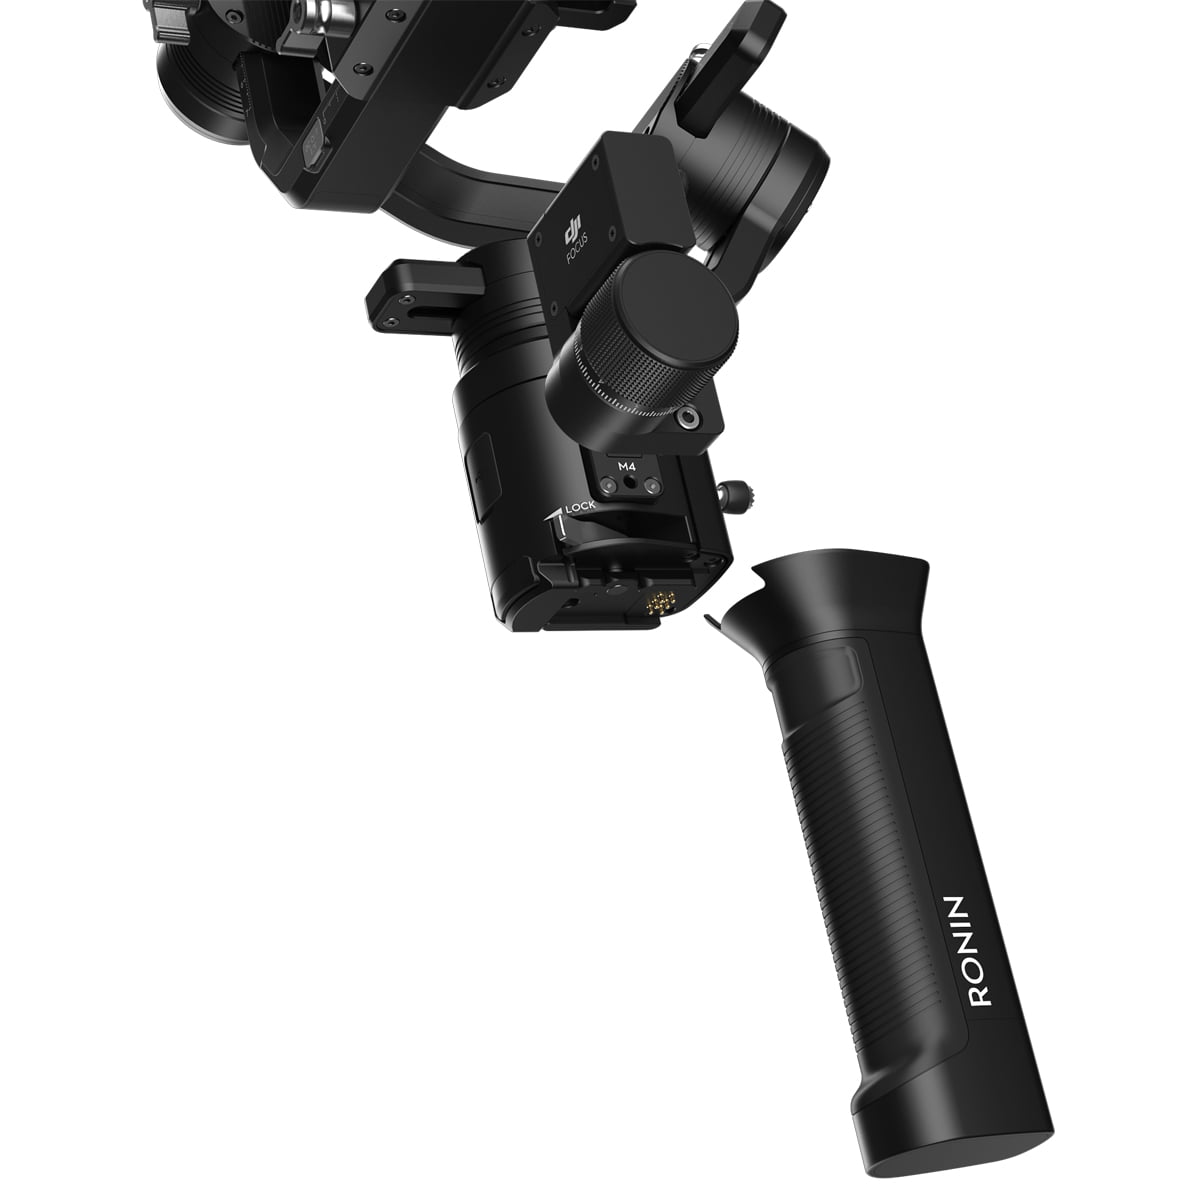 DJI Ronin-S with Superior 3-Axis Stabilization & 3.6kg Payload - In 